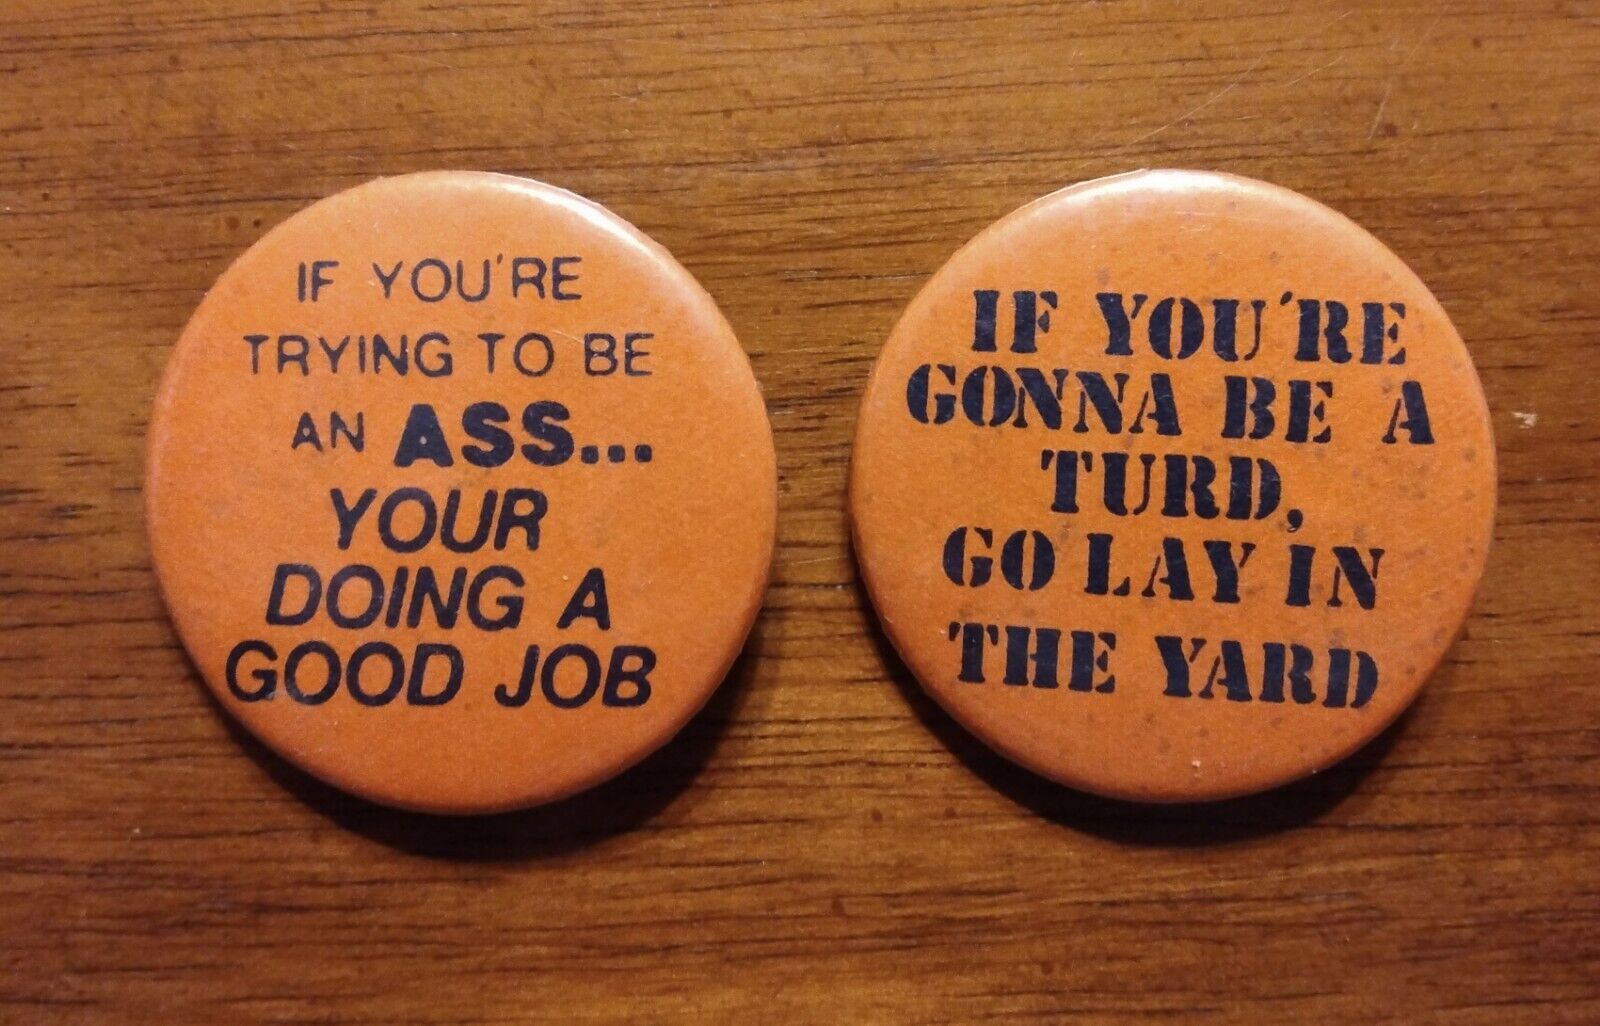 2 Vintage Insult Button Pins Gonna Be a Turd Lay in Yard Good Job Being an Ass